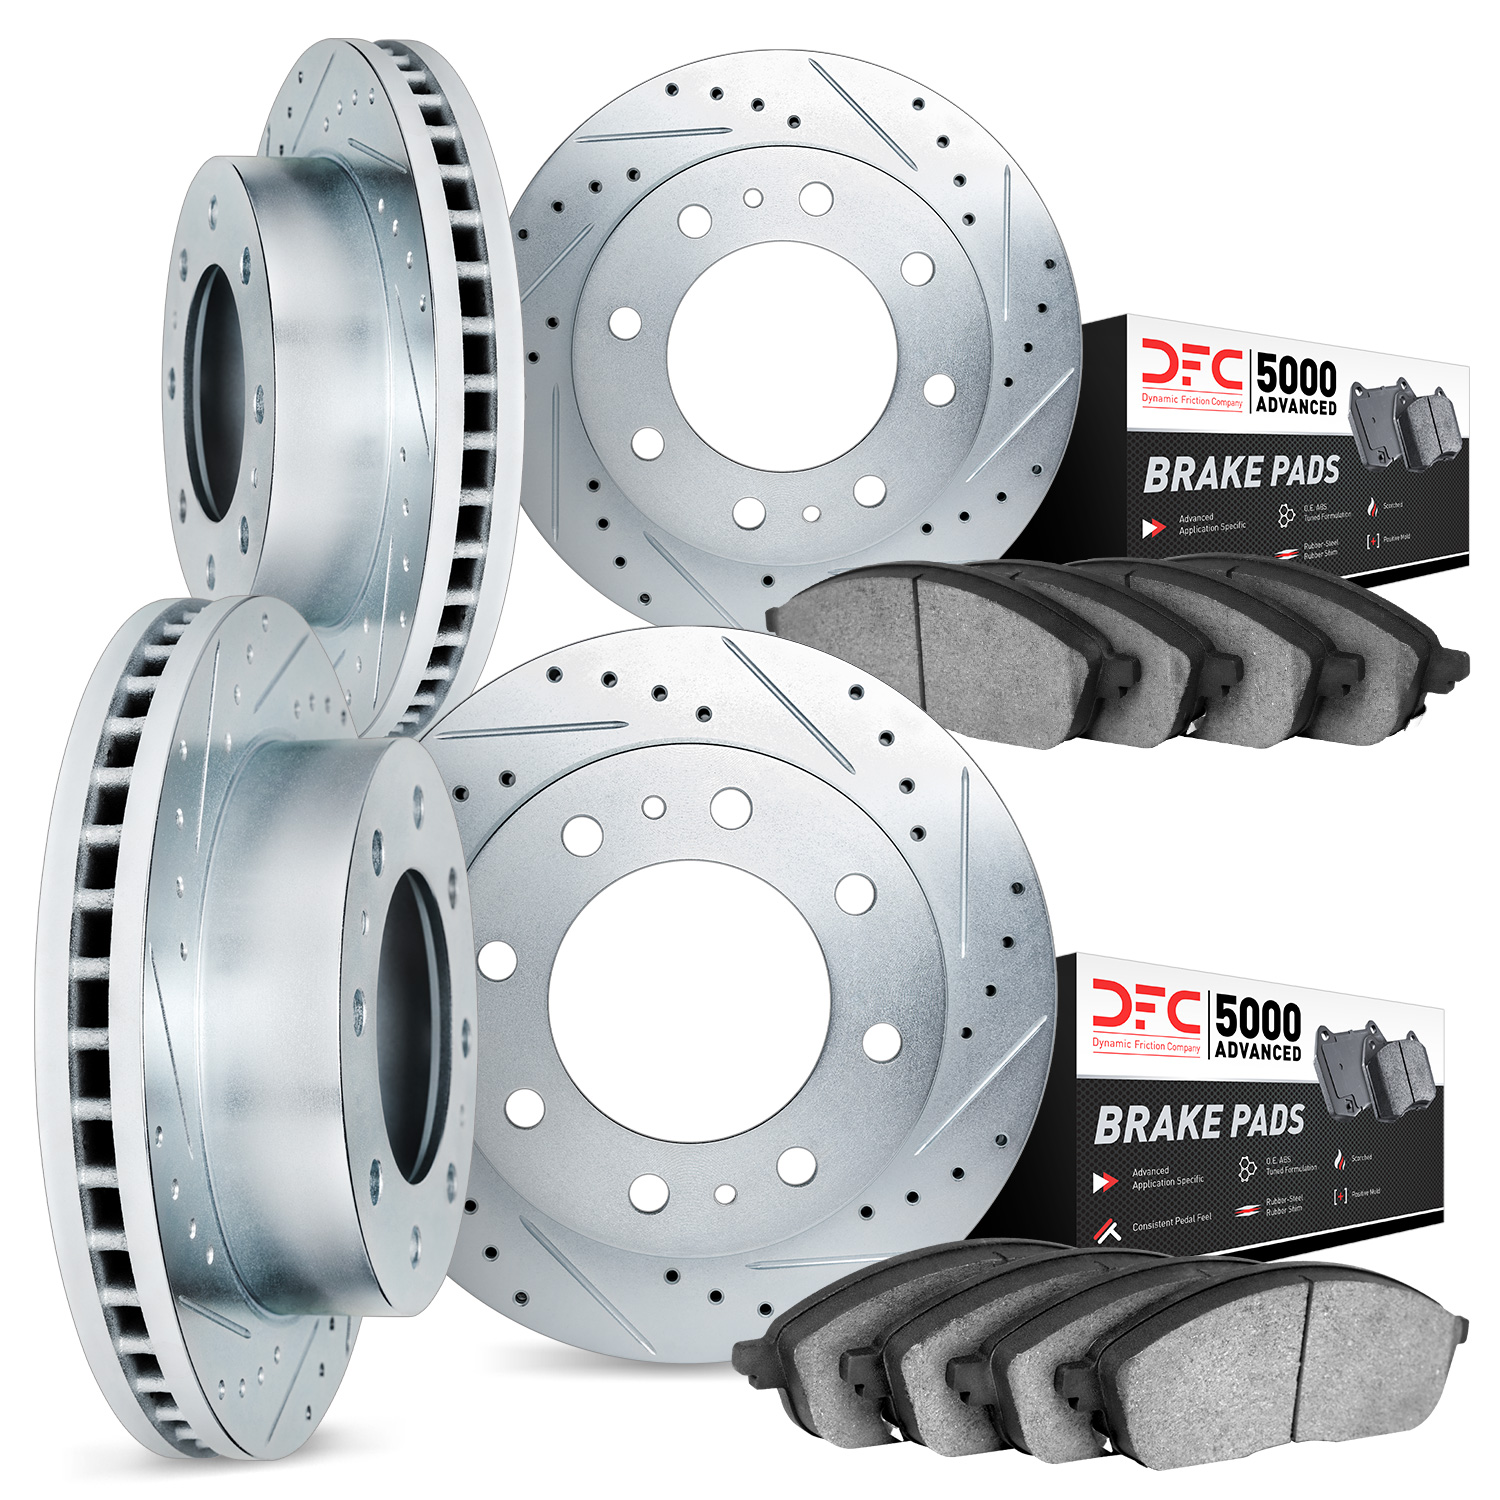 7504-48031 Drilled/Slotted Brake Rotors w/5000 Advanced Brake Pads Kit [Silver], 2001-2010 GM, Position: Front and Rear